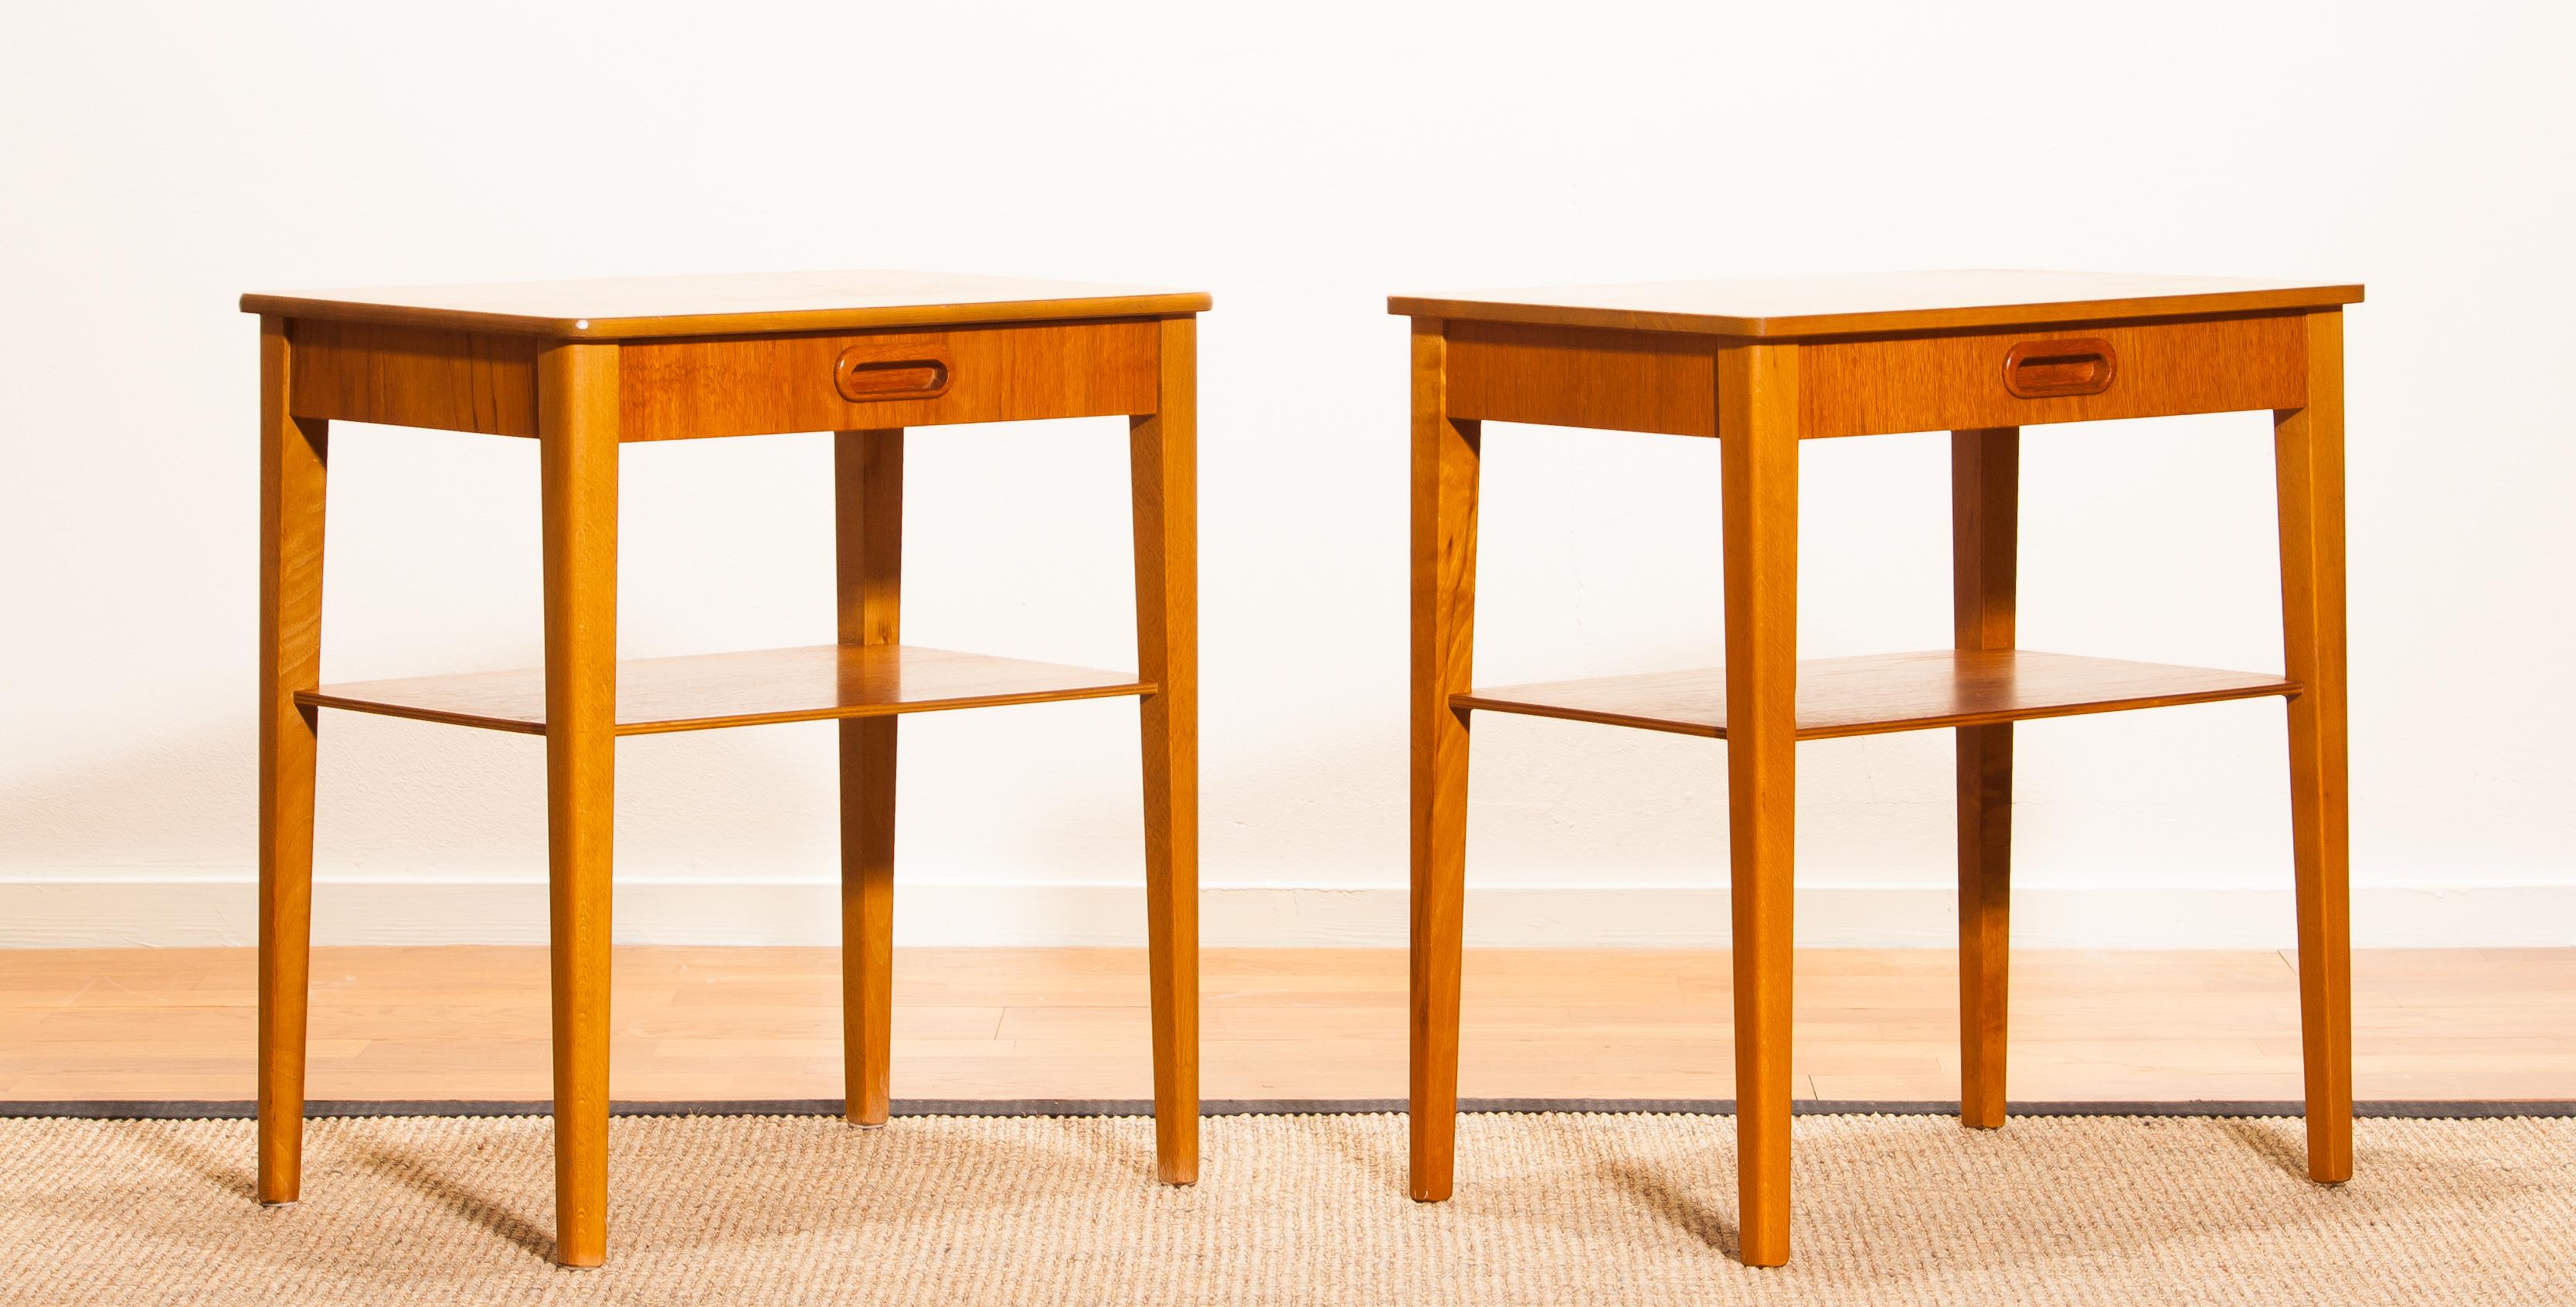 Beautiful pair of bedside tables by Björkås Möbelfabrik, Sweden.
They are made of teak, with single drawer and magazine shelf.
The tables are in a very nice condition.
Period 1950s
Dimensions H 50 cm, W 45 cm, D 32 cm.